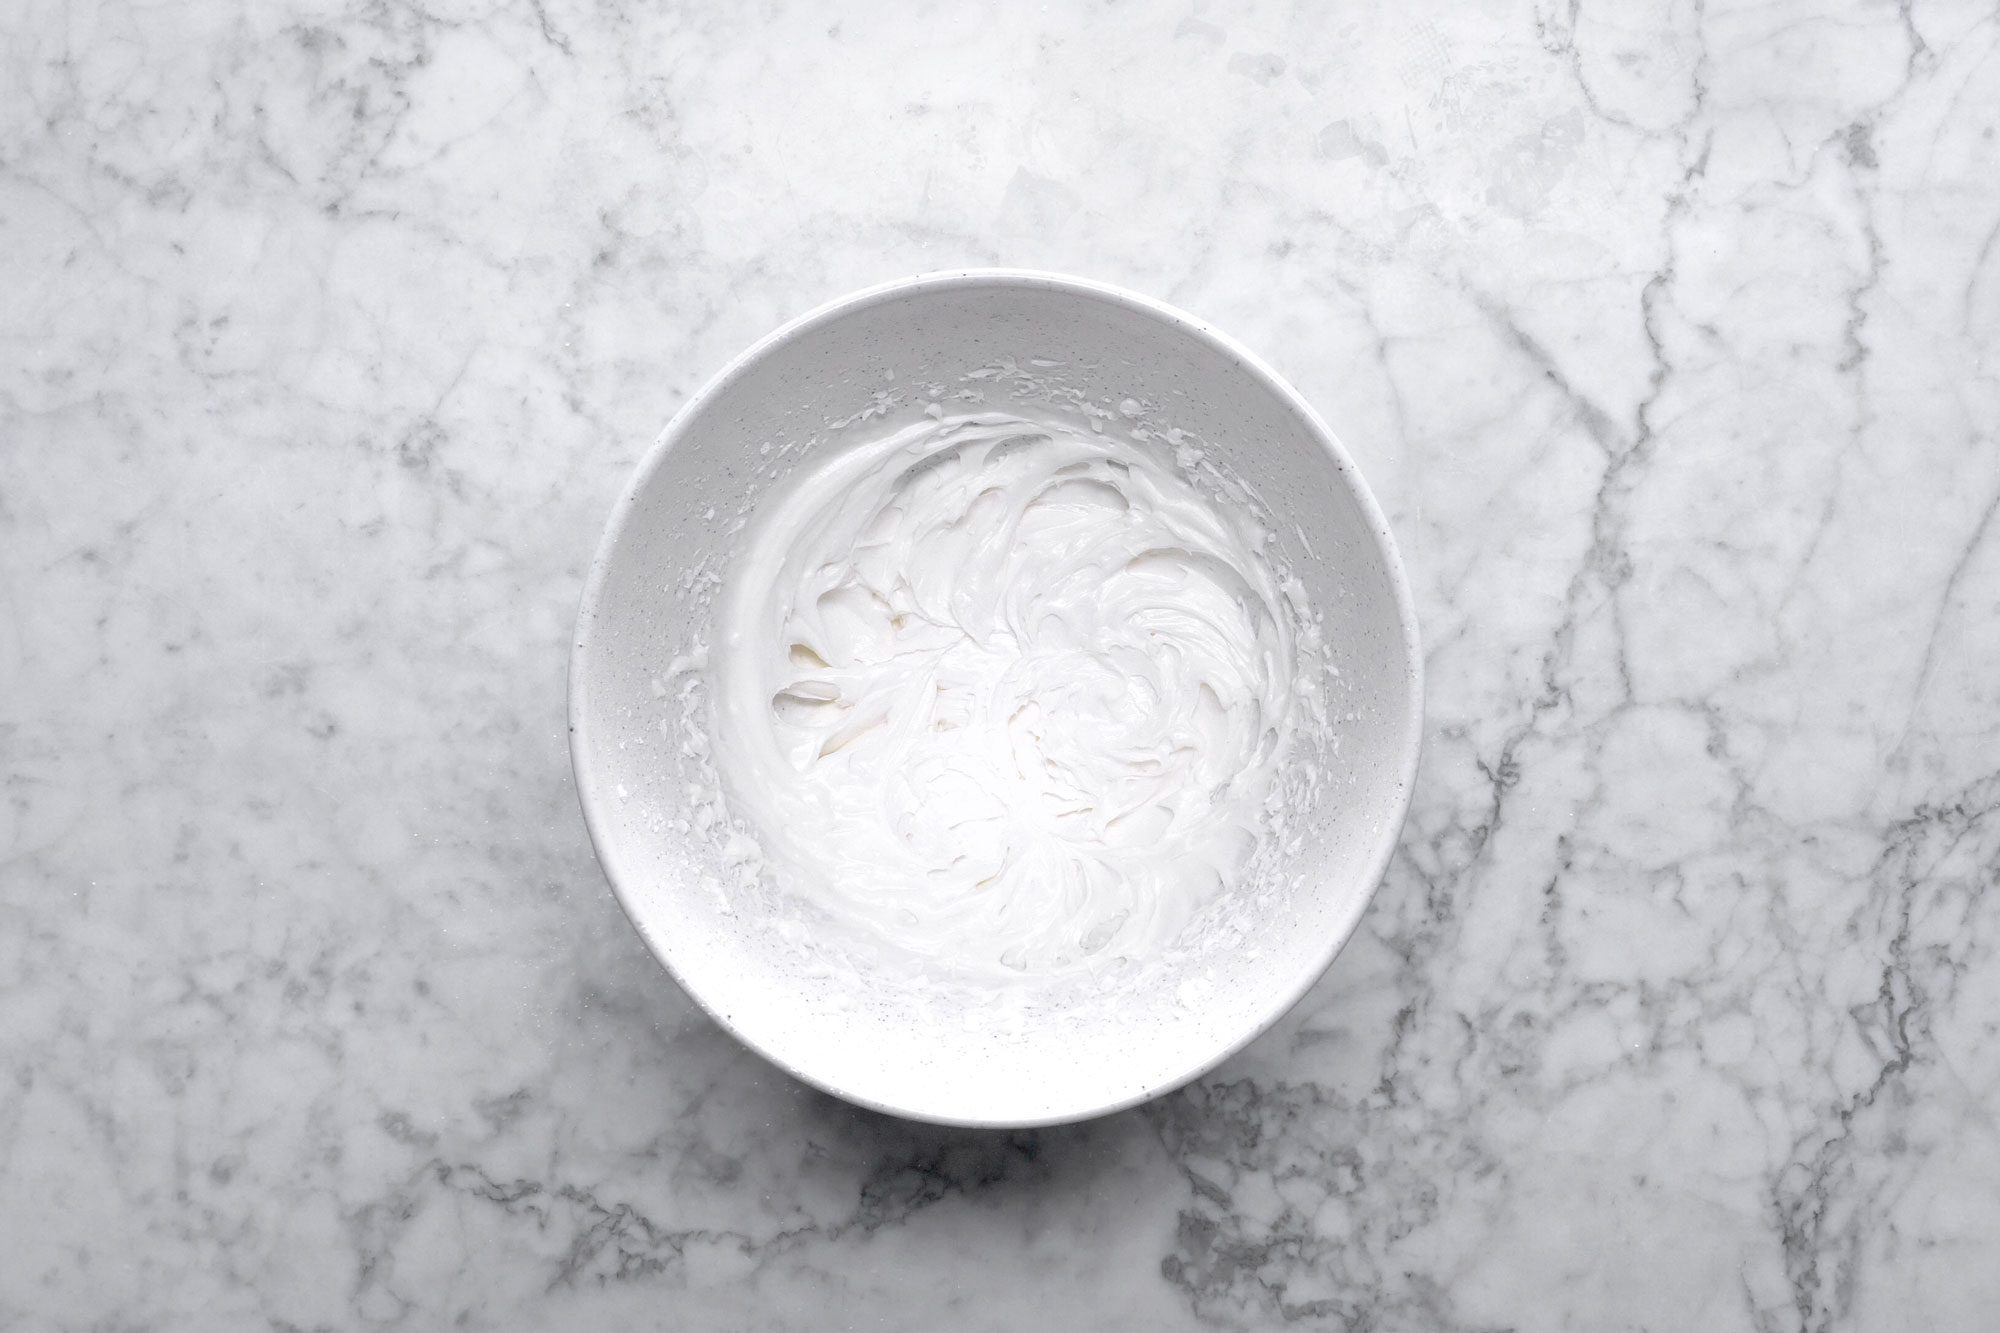 Beat together the confectioners’ sugar in a large bowl